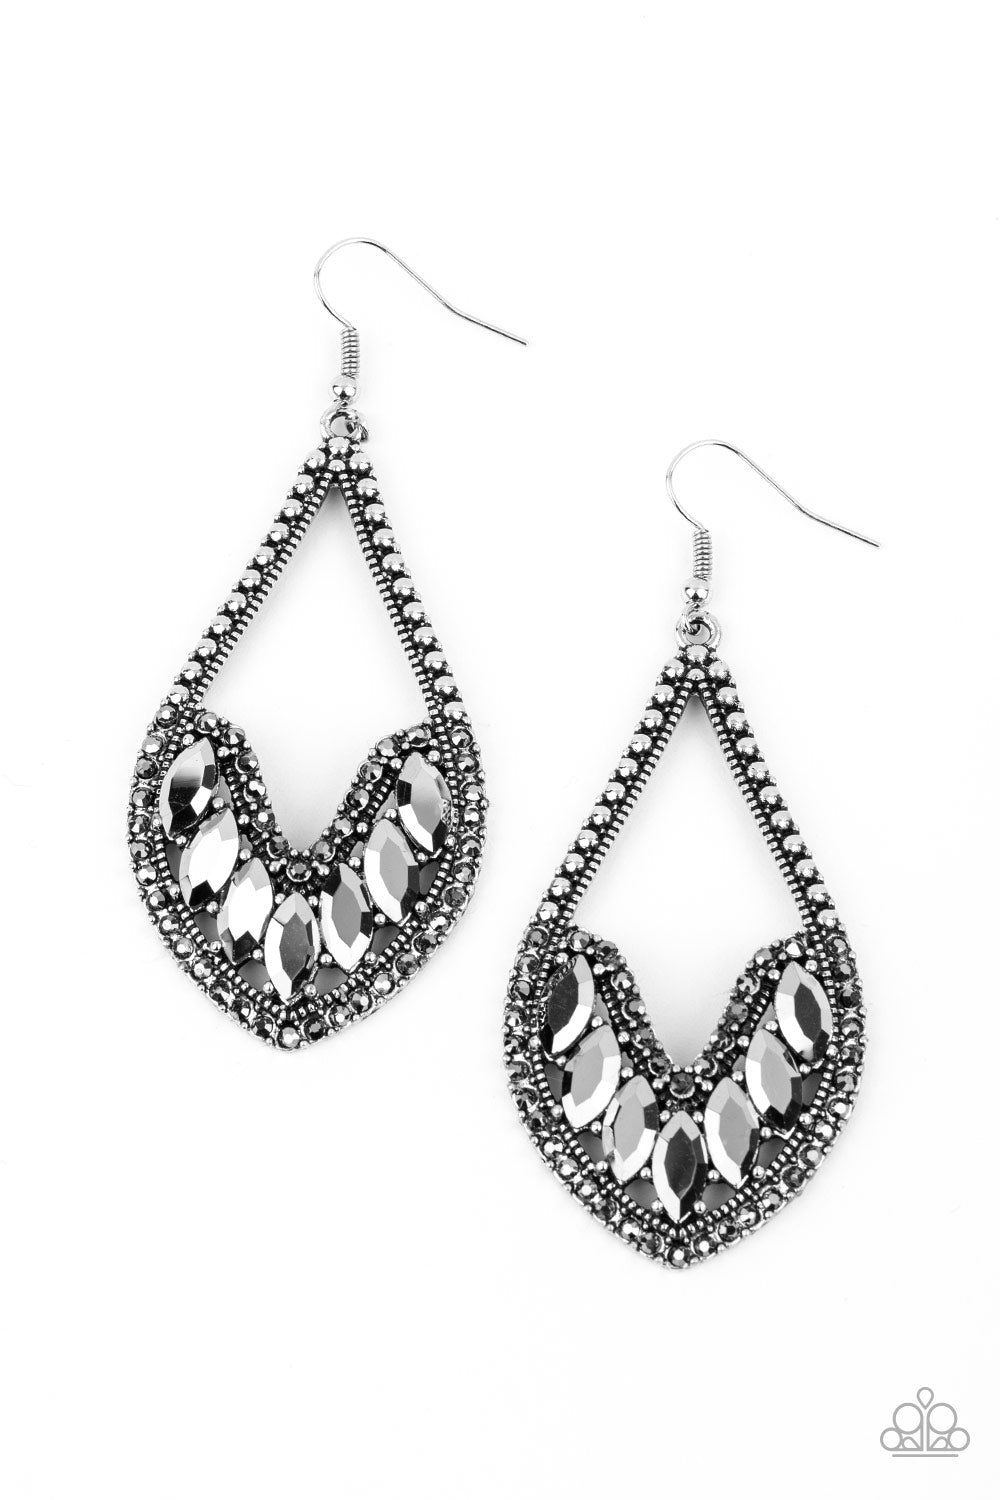 Ethereal Expressions Silver Earring - Paparazzi Accessories